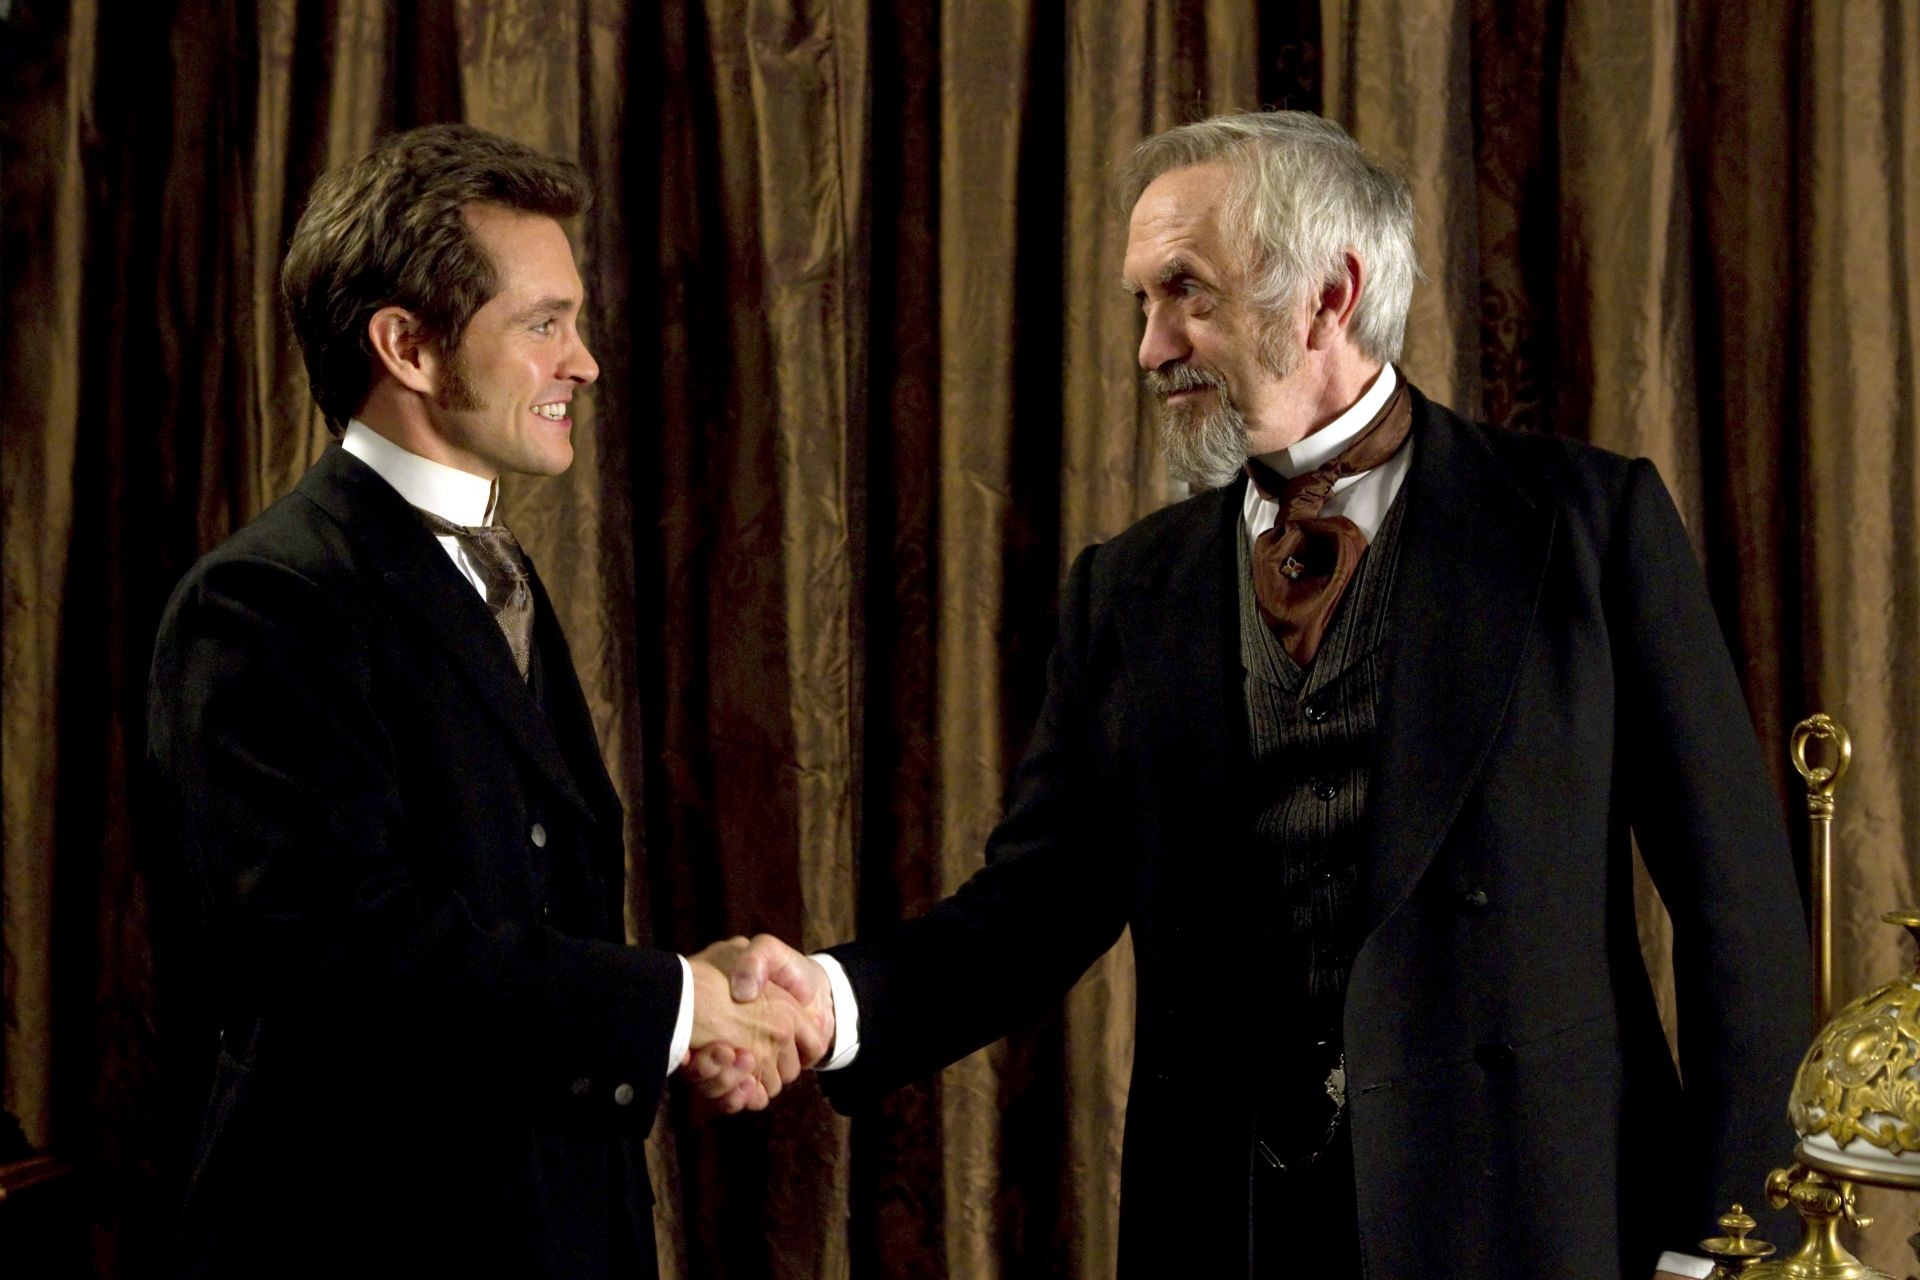 Hugh Dancy stars as Mortimer Granville and Jonathan Pryce stars as Dr. Dalrymple in Sony Pictures Classics' Hysteria (2012). Photo credit by Ricardo Vaz Palma.